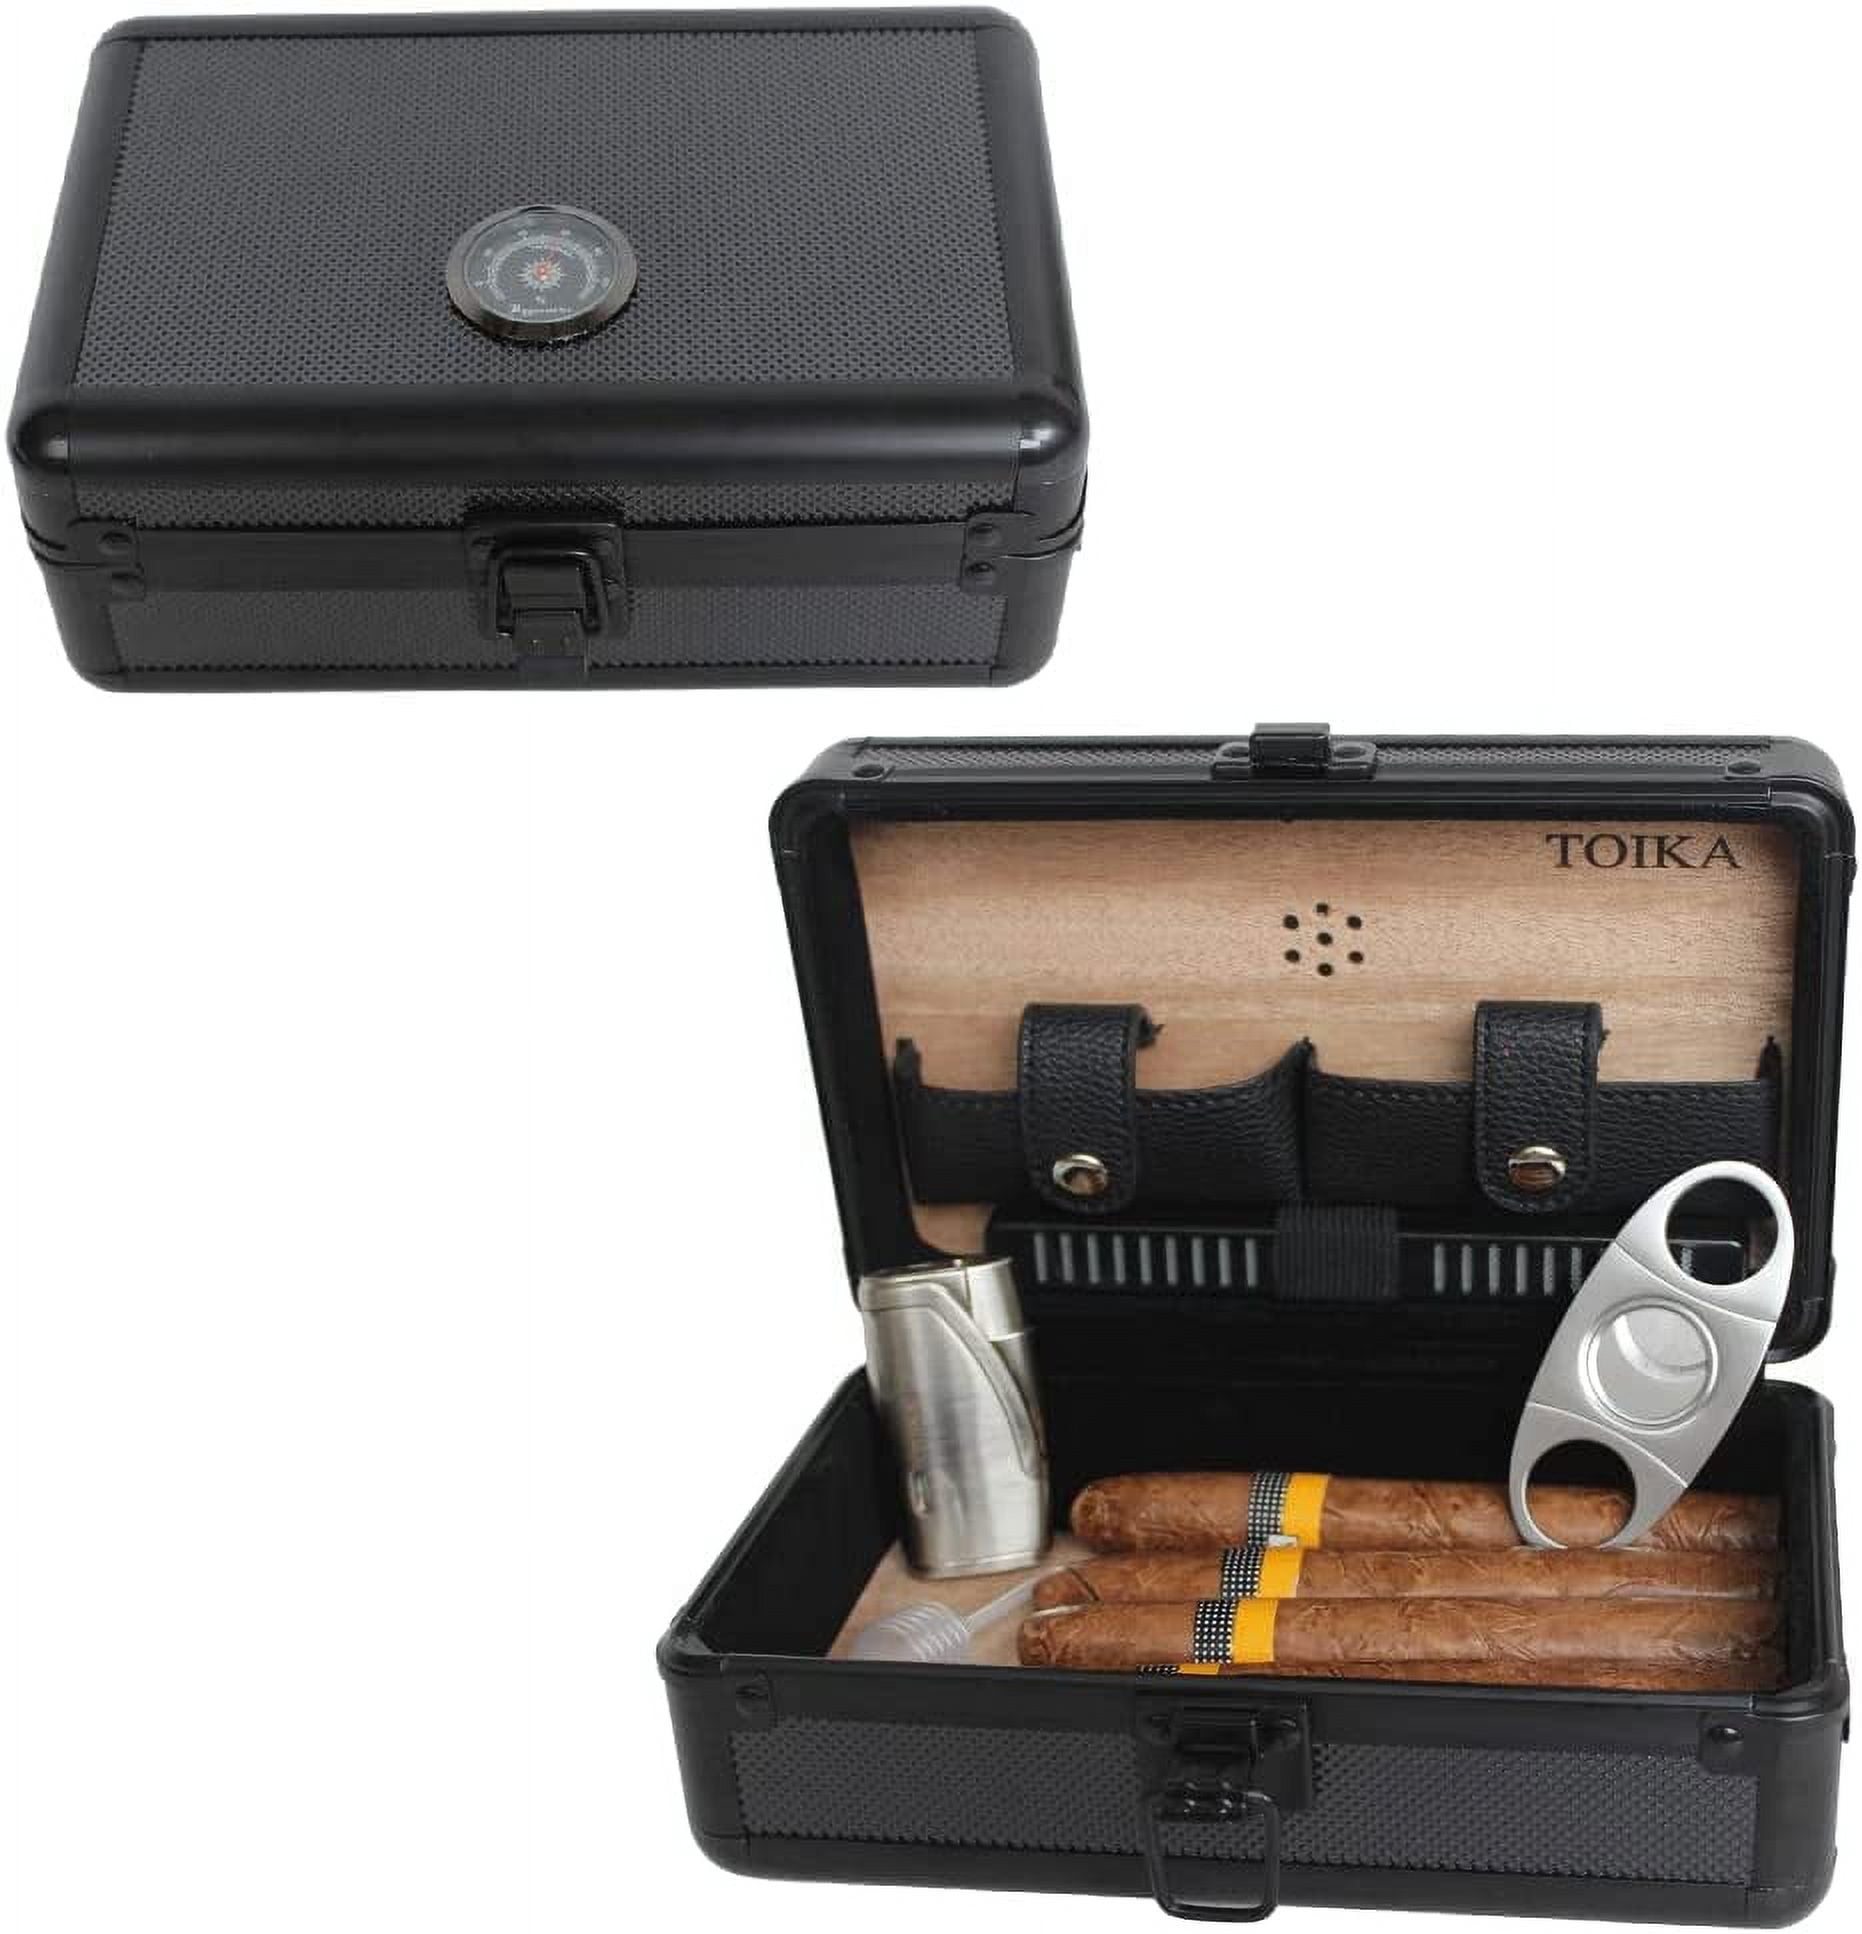 GALINER Portable Leather Travel Cigar Case Cedar Wood Linied Humidor With  Torch Jet Flame Cigar Lighters Cutter Humidifier Set